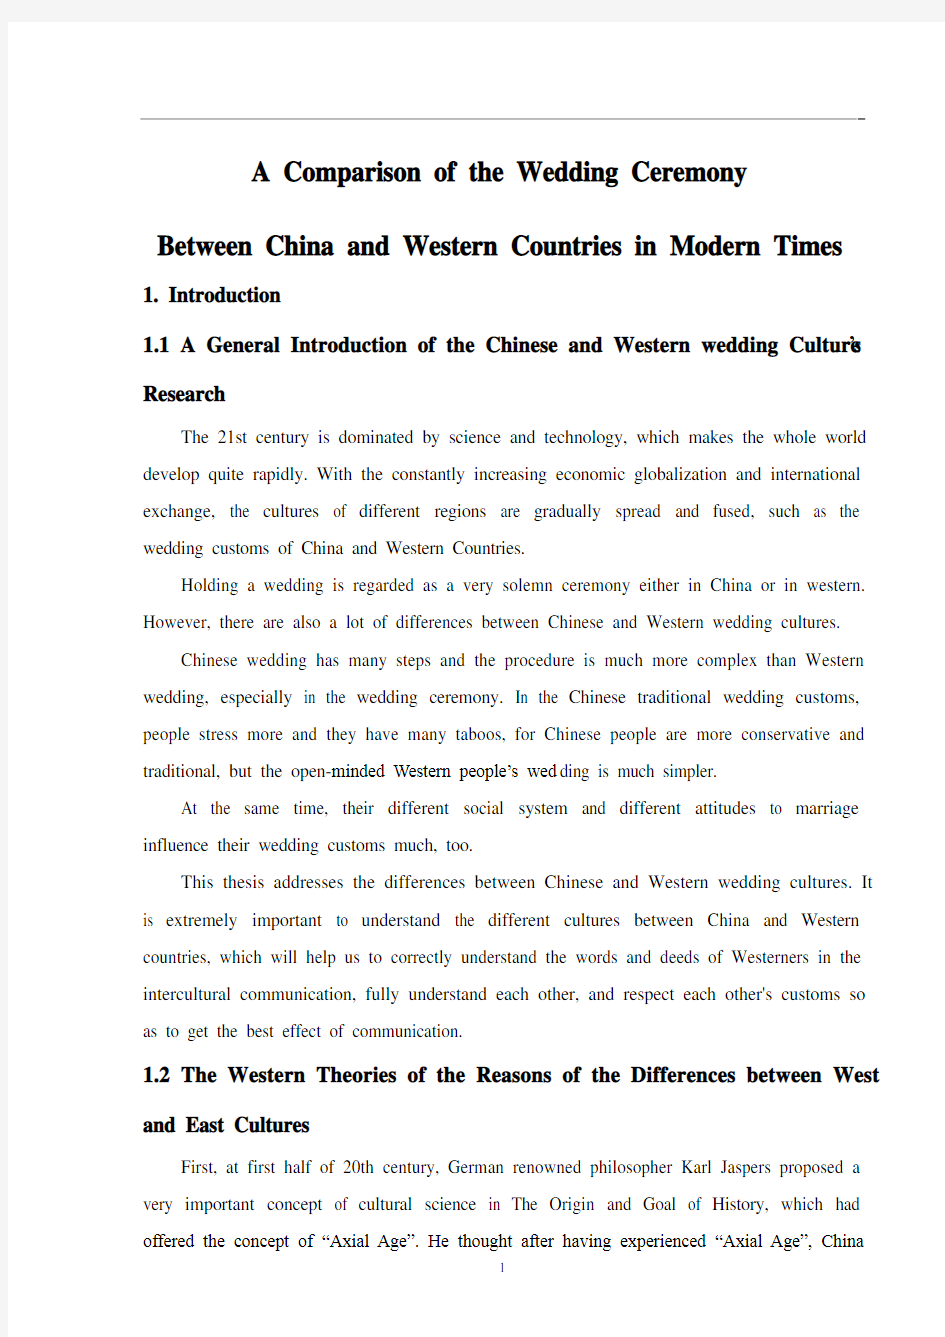 A Comparison of the Wedding Ceremony Between China and Western Countries in Modern Times